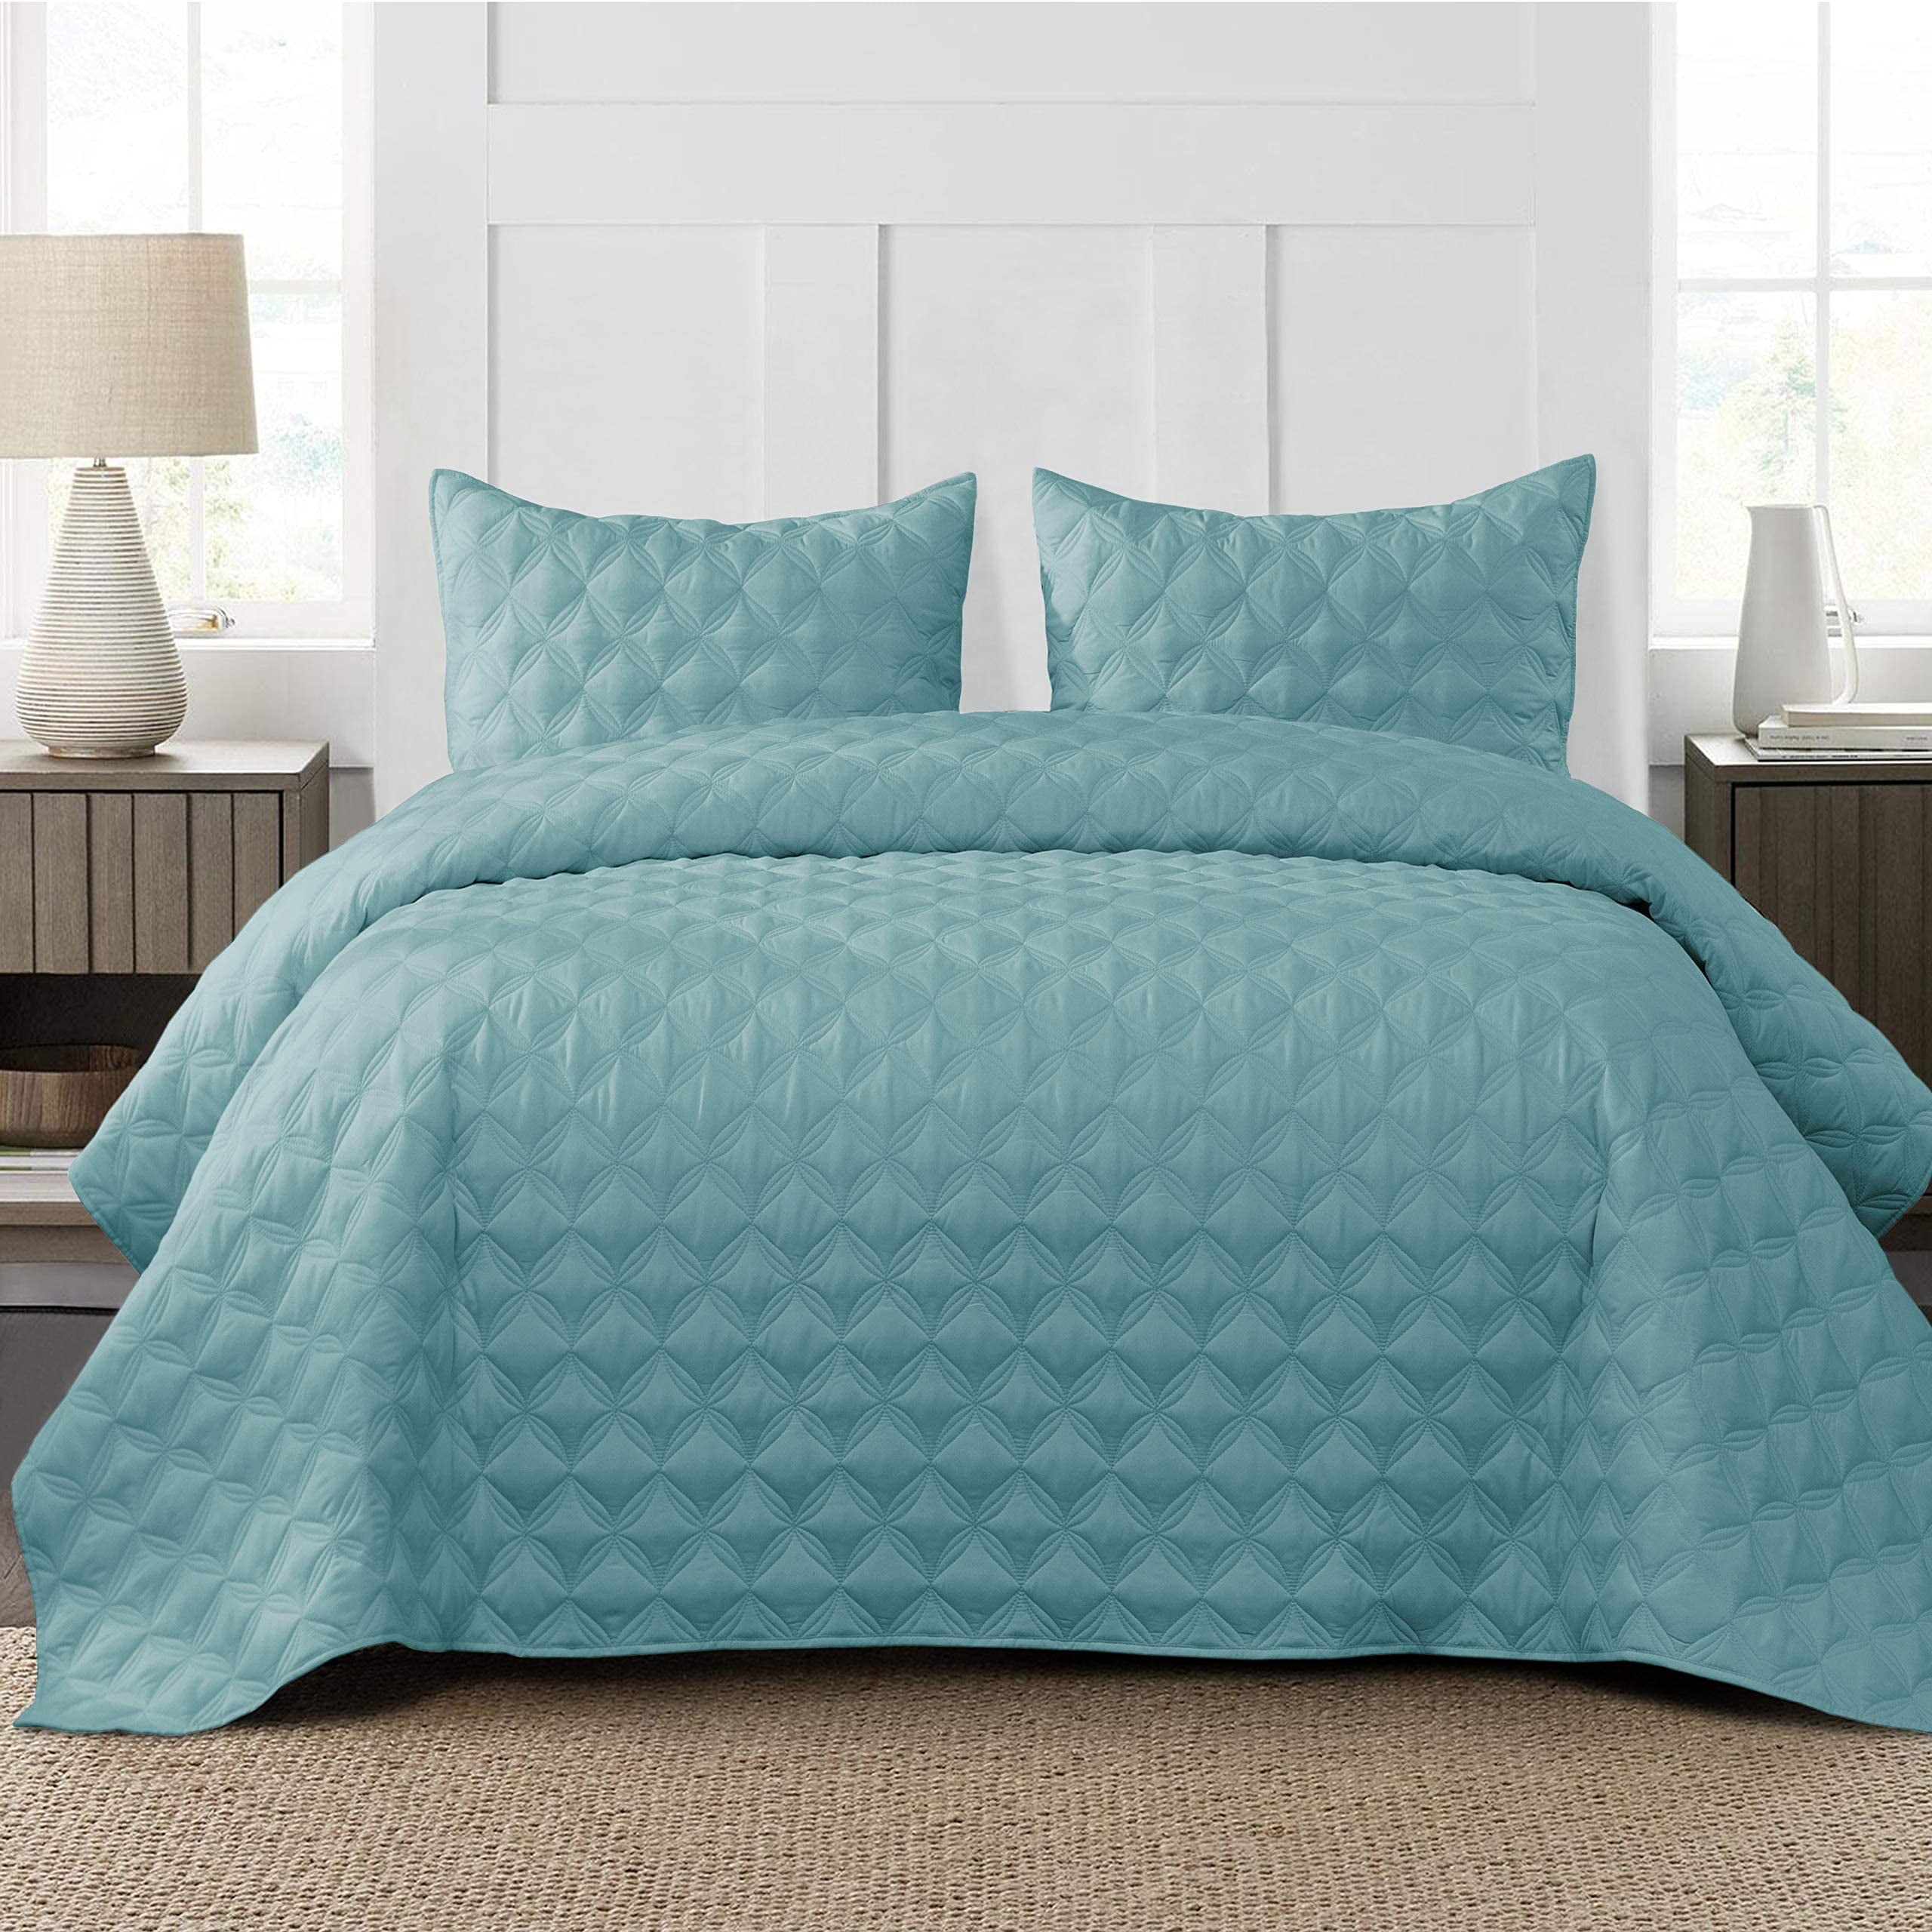 Exclusivo Mezcla 3-Piece Queen Size Quilt Set with Pillow Shams - Soft Reversible& Hypoallergenic Ellipse Blue as Bedspread/Coverlet/Bed Cover Lightweight